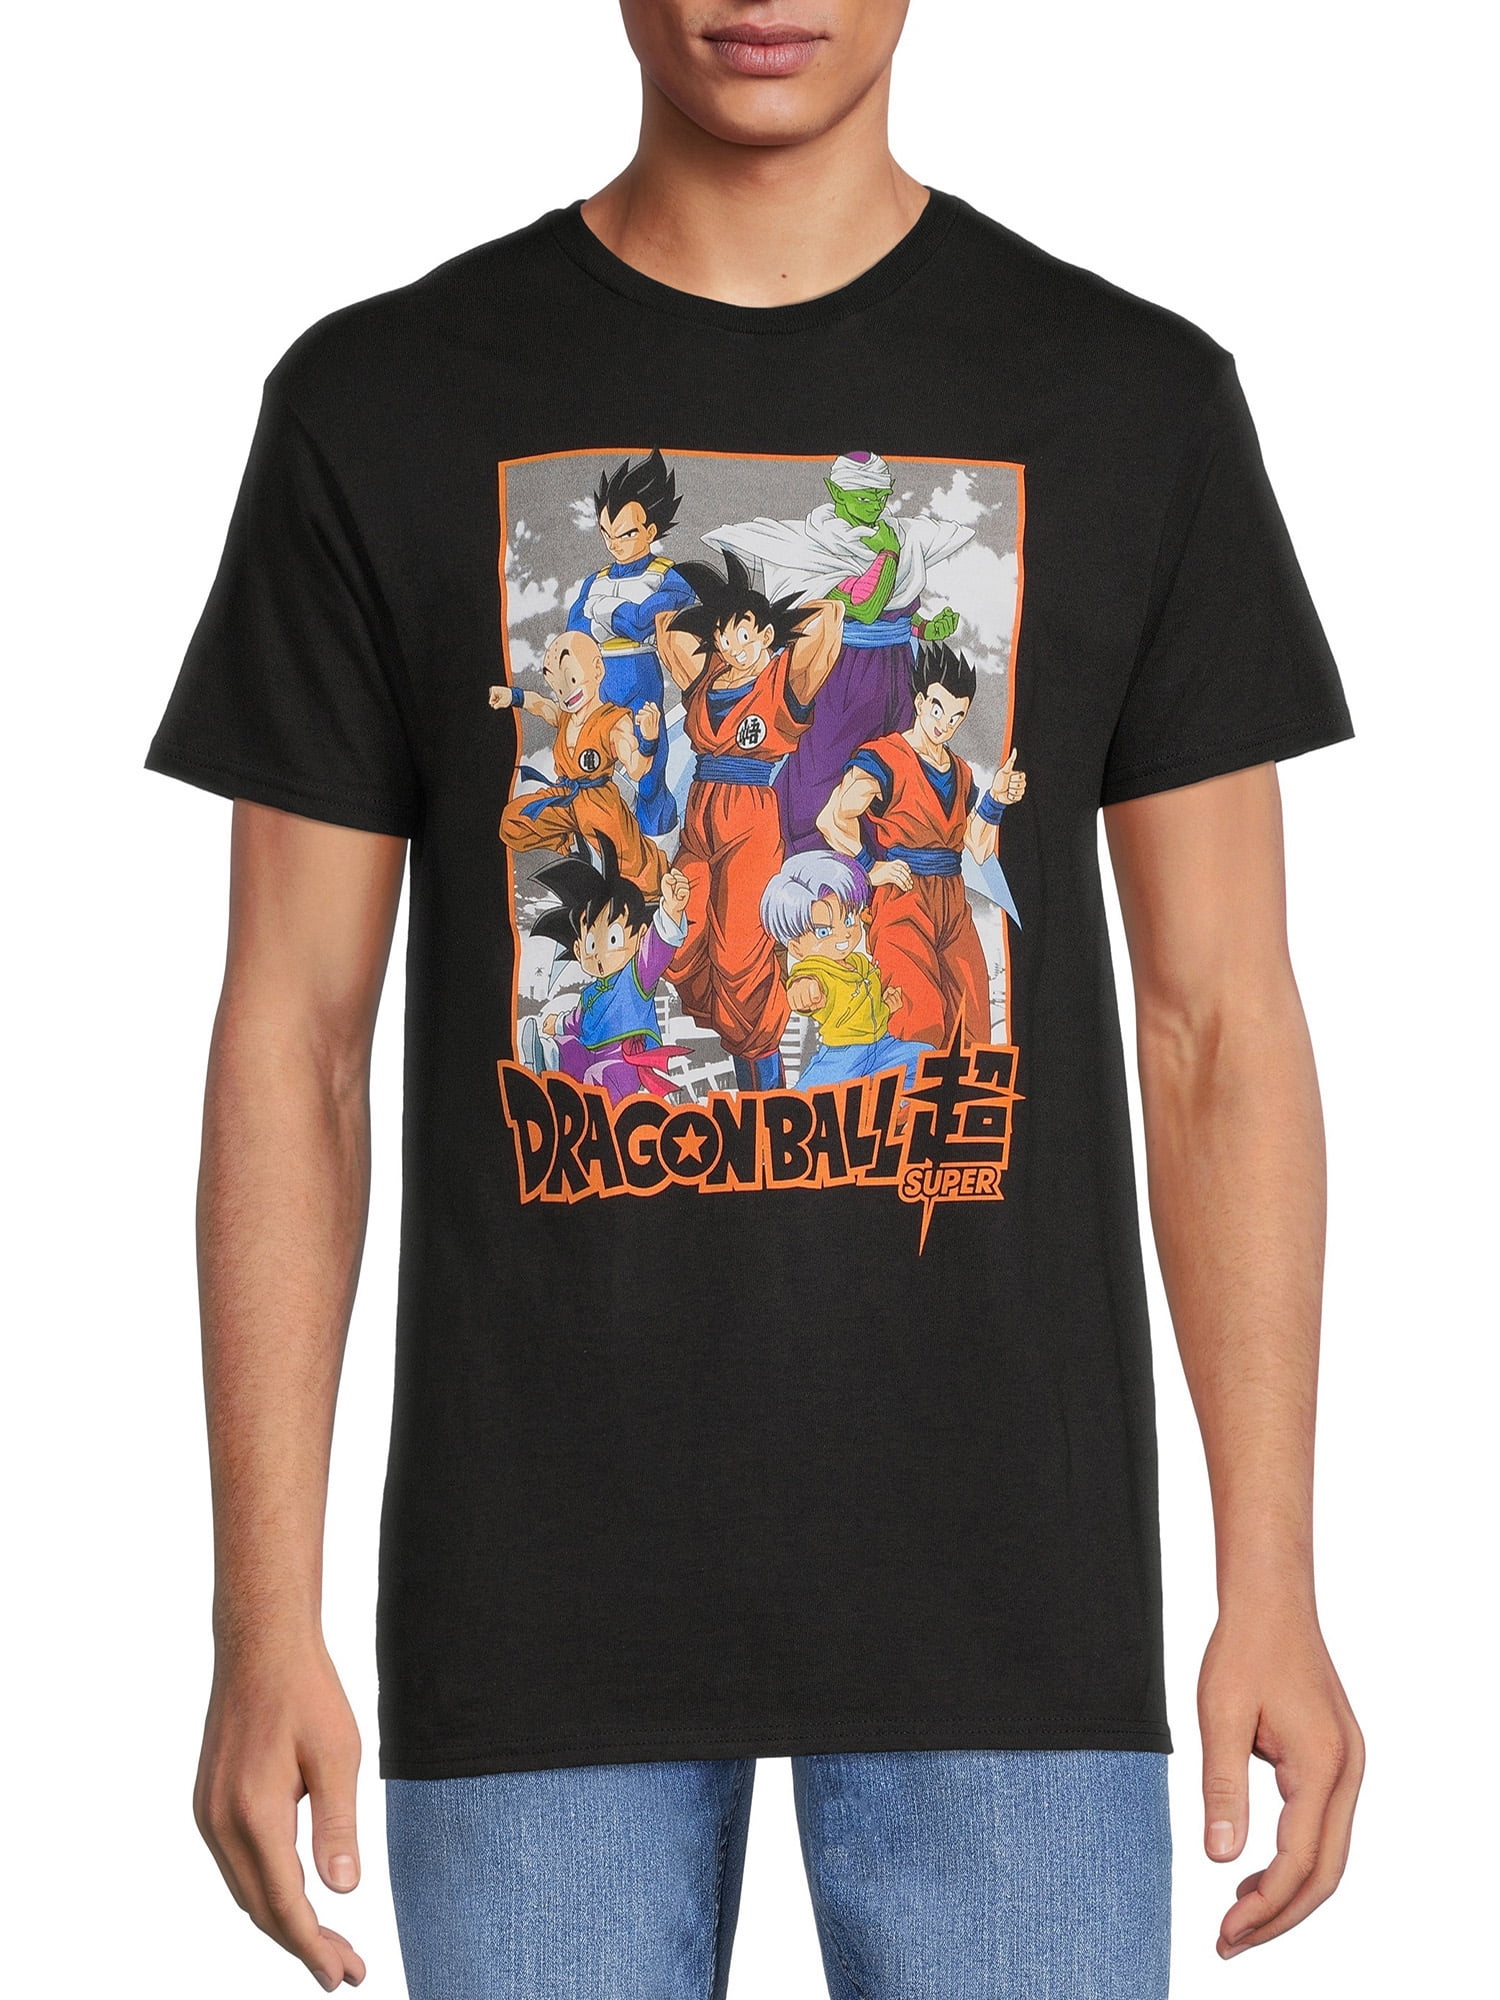 Dragon Ball Z Men’s Graphic Tee with Short Sleeves